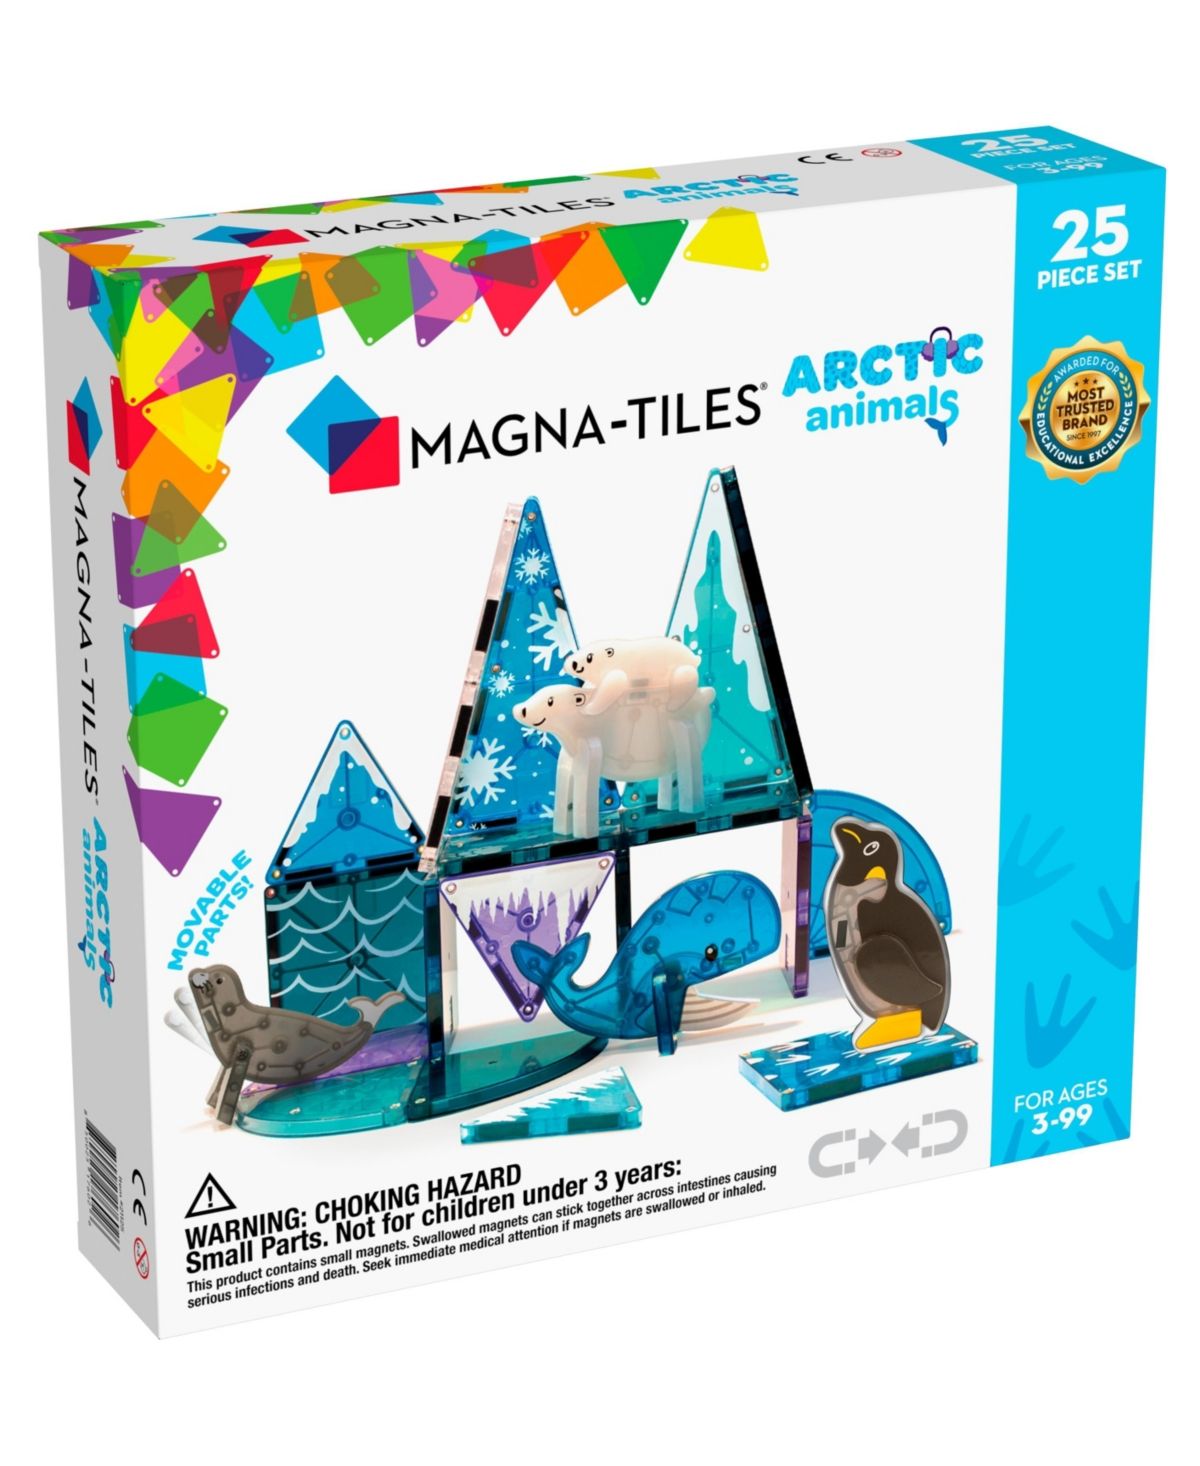 Arctic Animals 25-Piece Set, Encourage Meaningful Play, Ages 3+ | Macys (US)